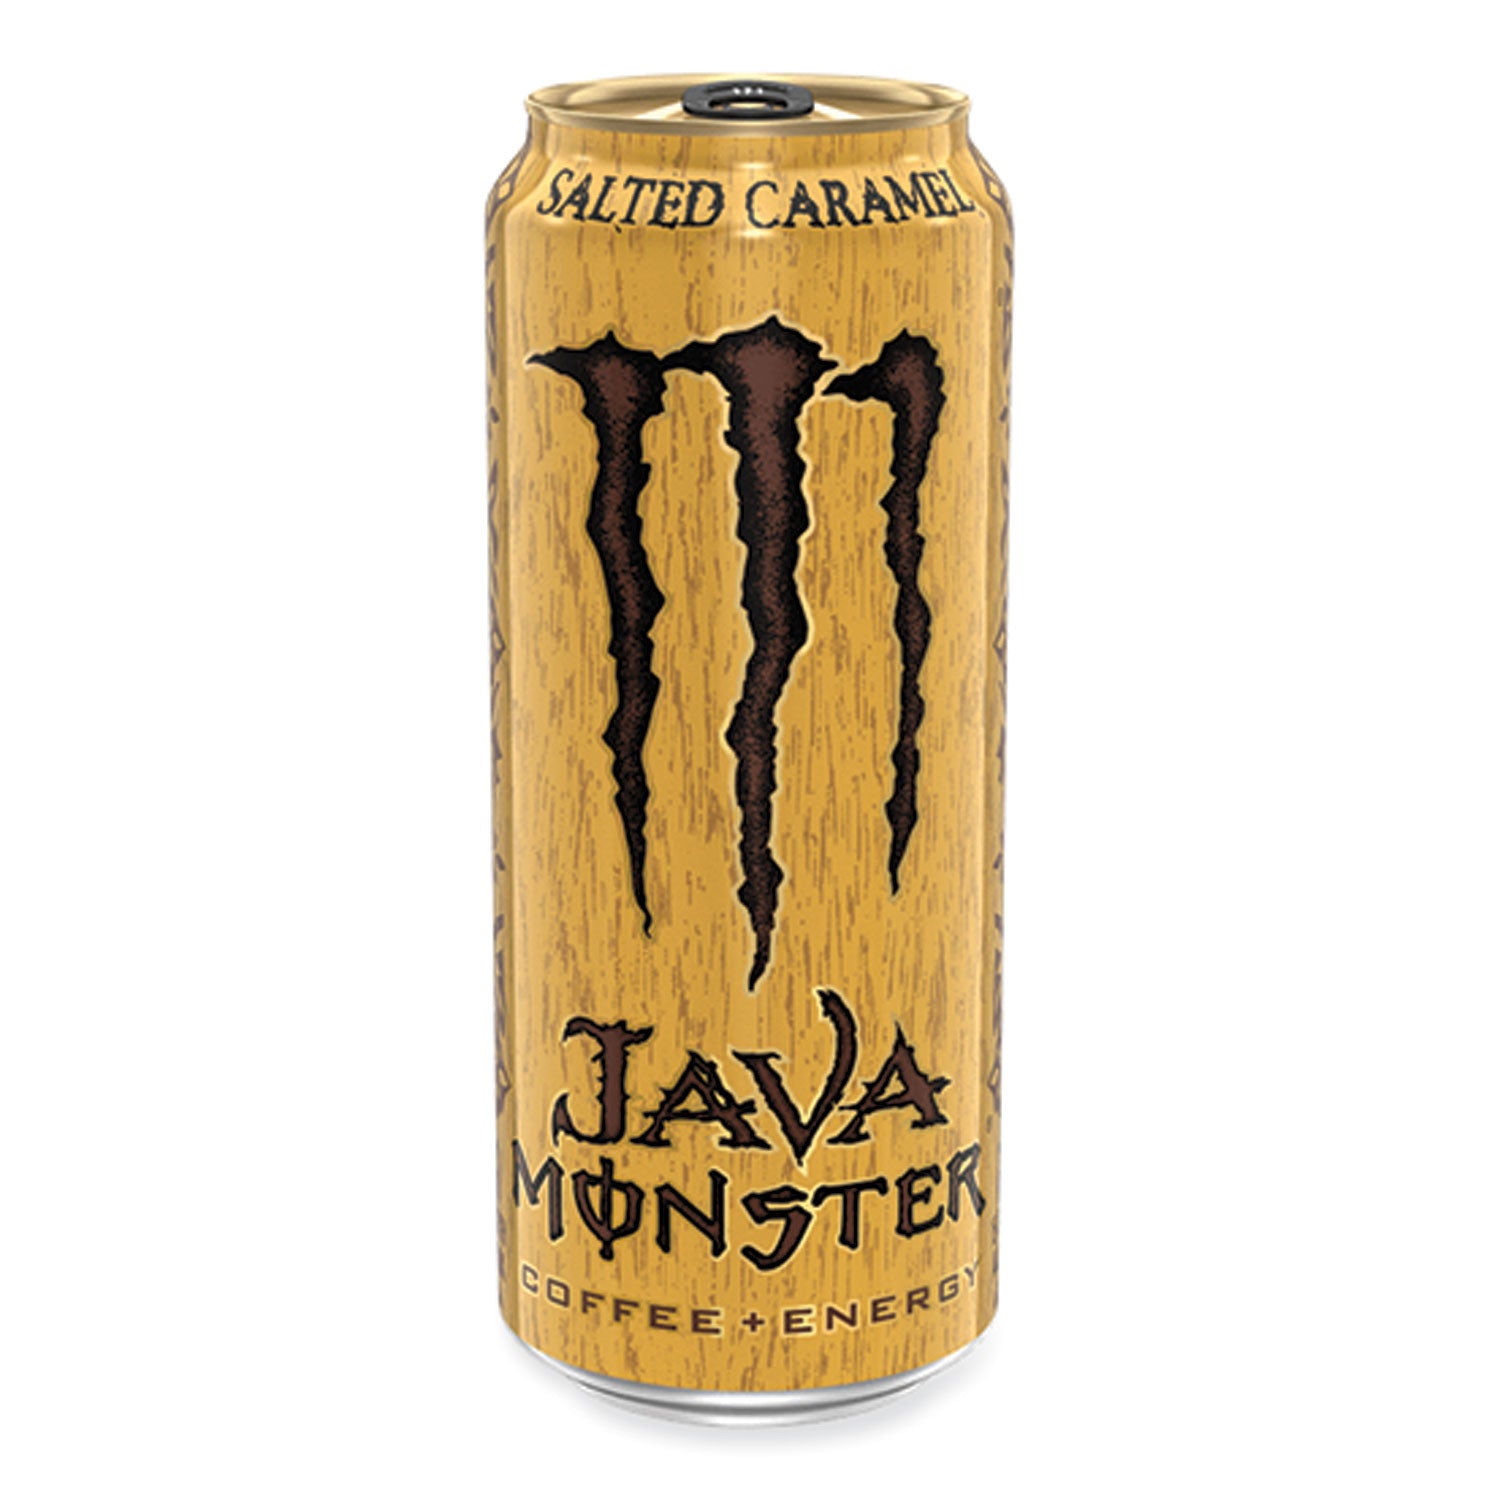 java-monster-cold-brew-coffee-salted-caramel-15-oz-can-12-pack_ccr070847024026 - 1